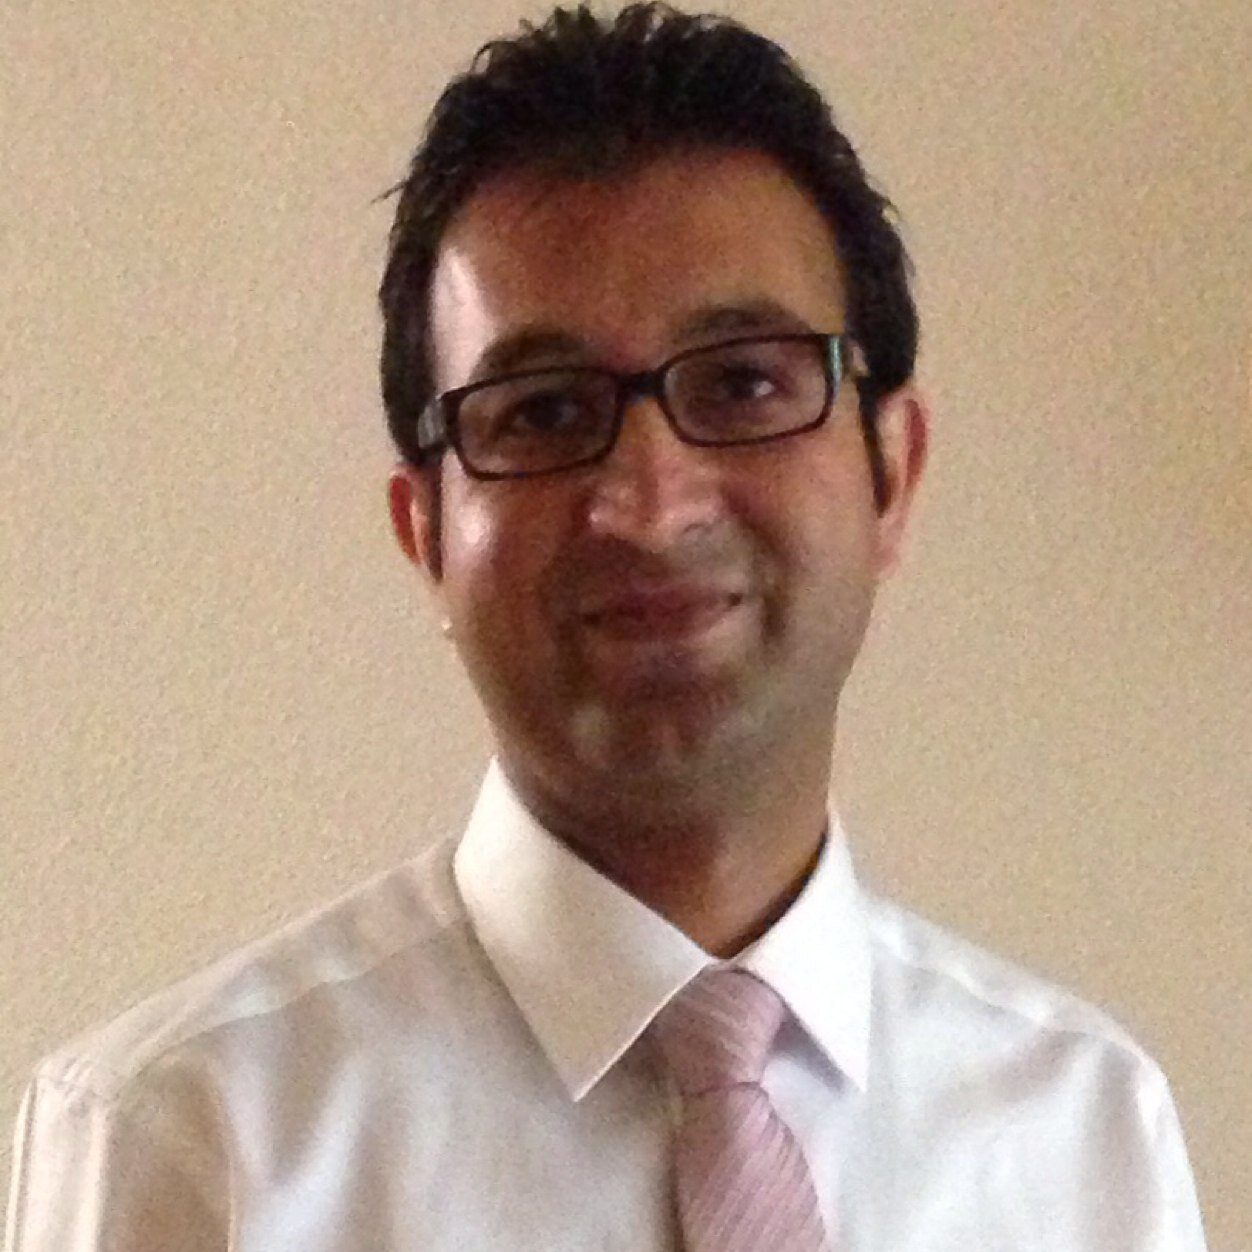 Dr. Rauf Arif is an Assistant Professor at Towson University, Maryland, USA.